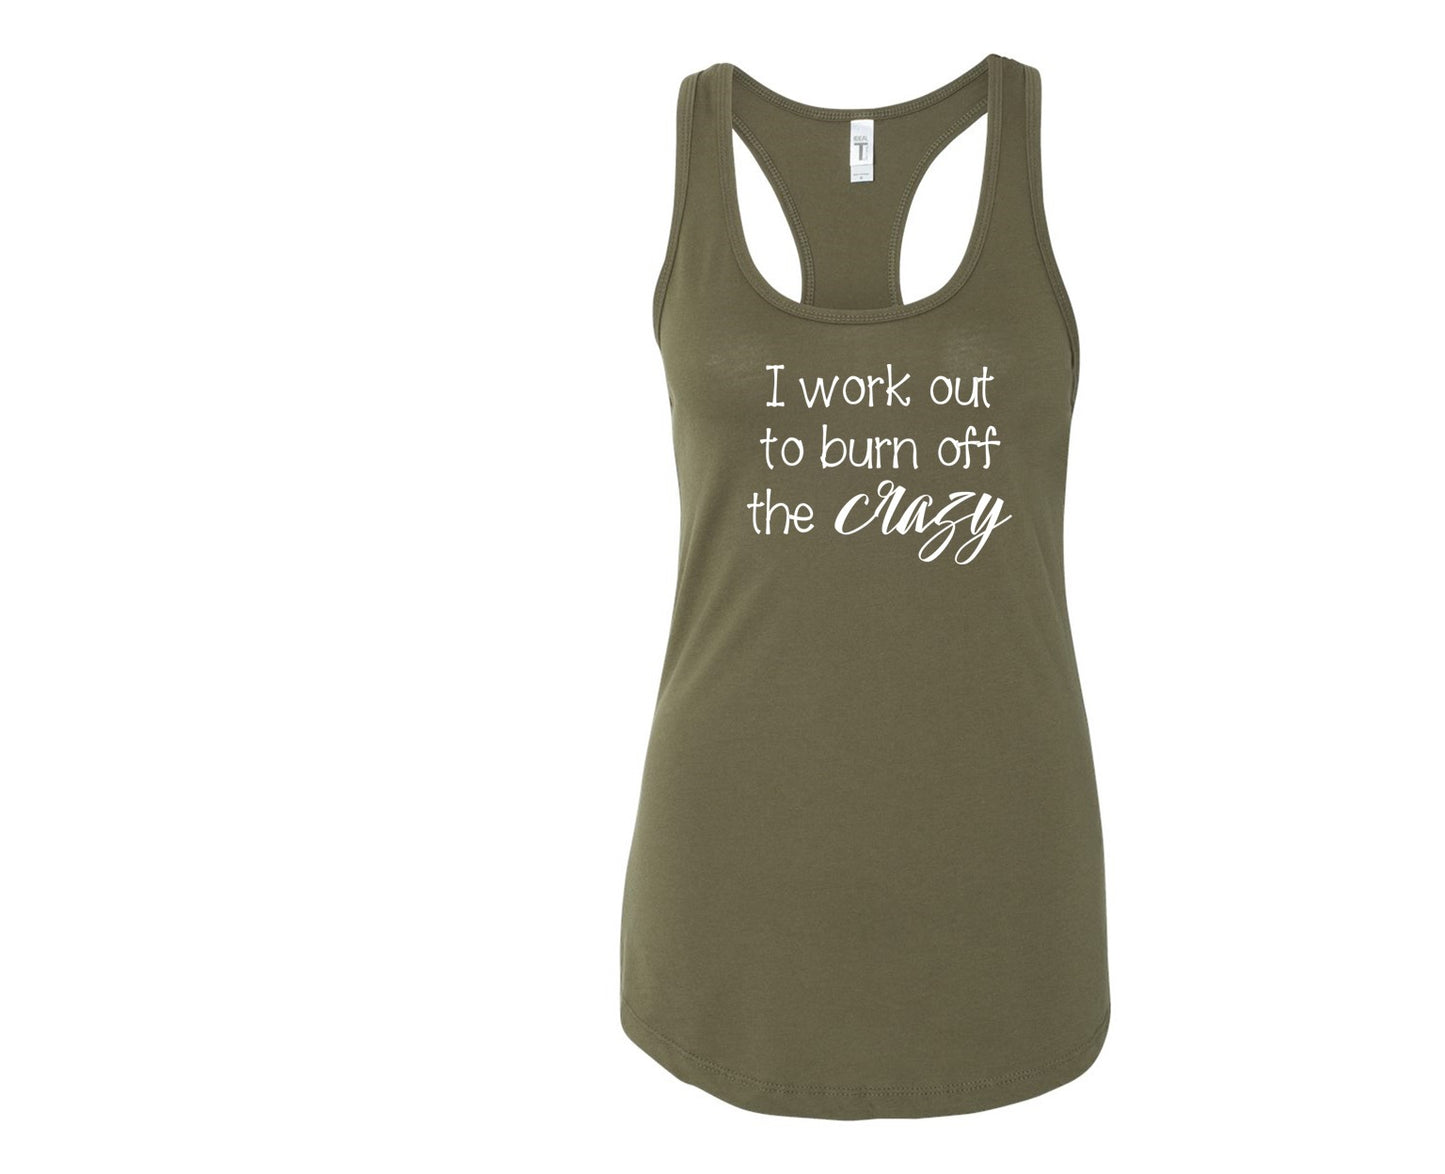 I work out to burn off the crazy - Racerback Tank